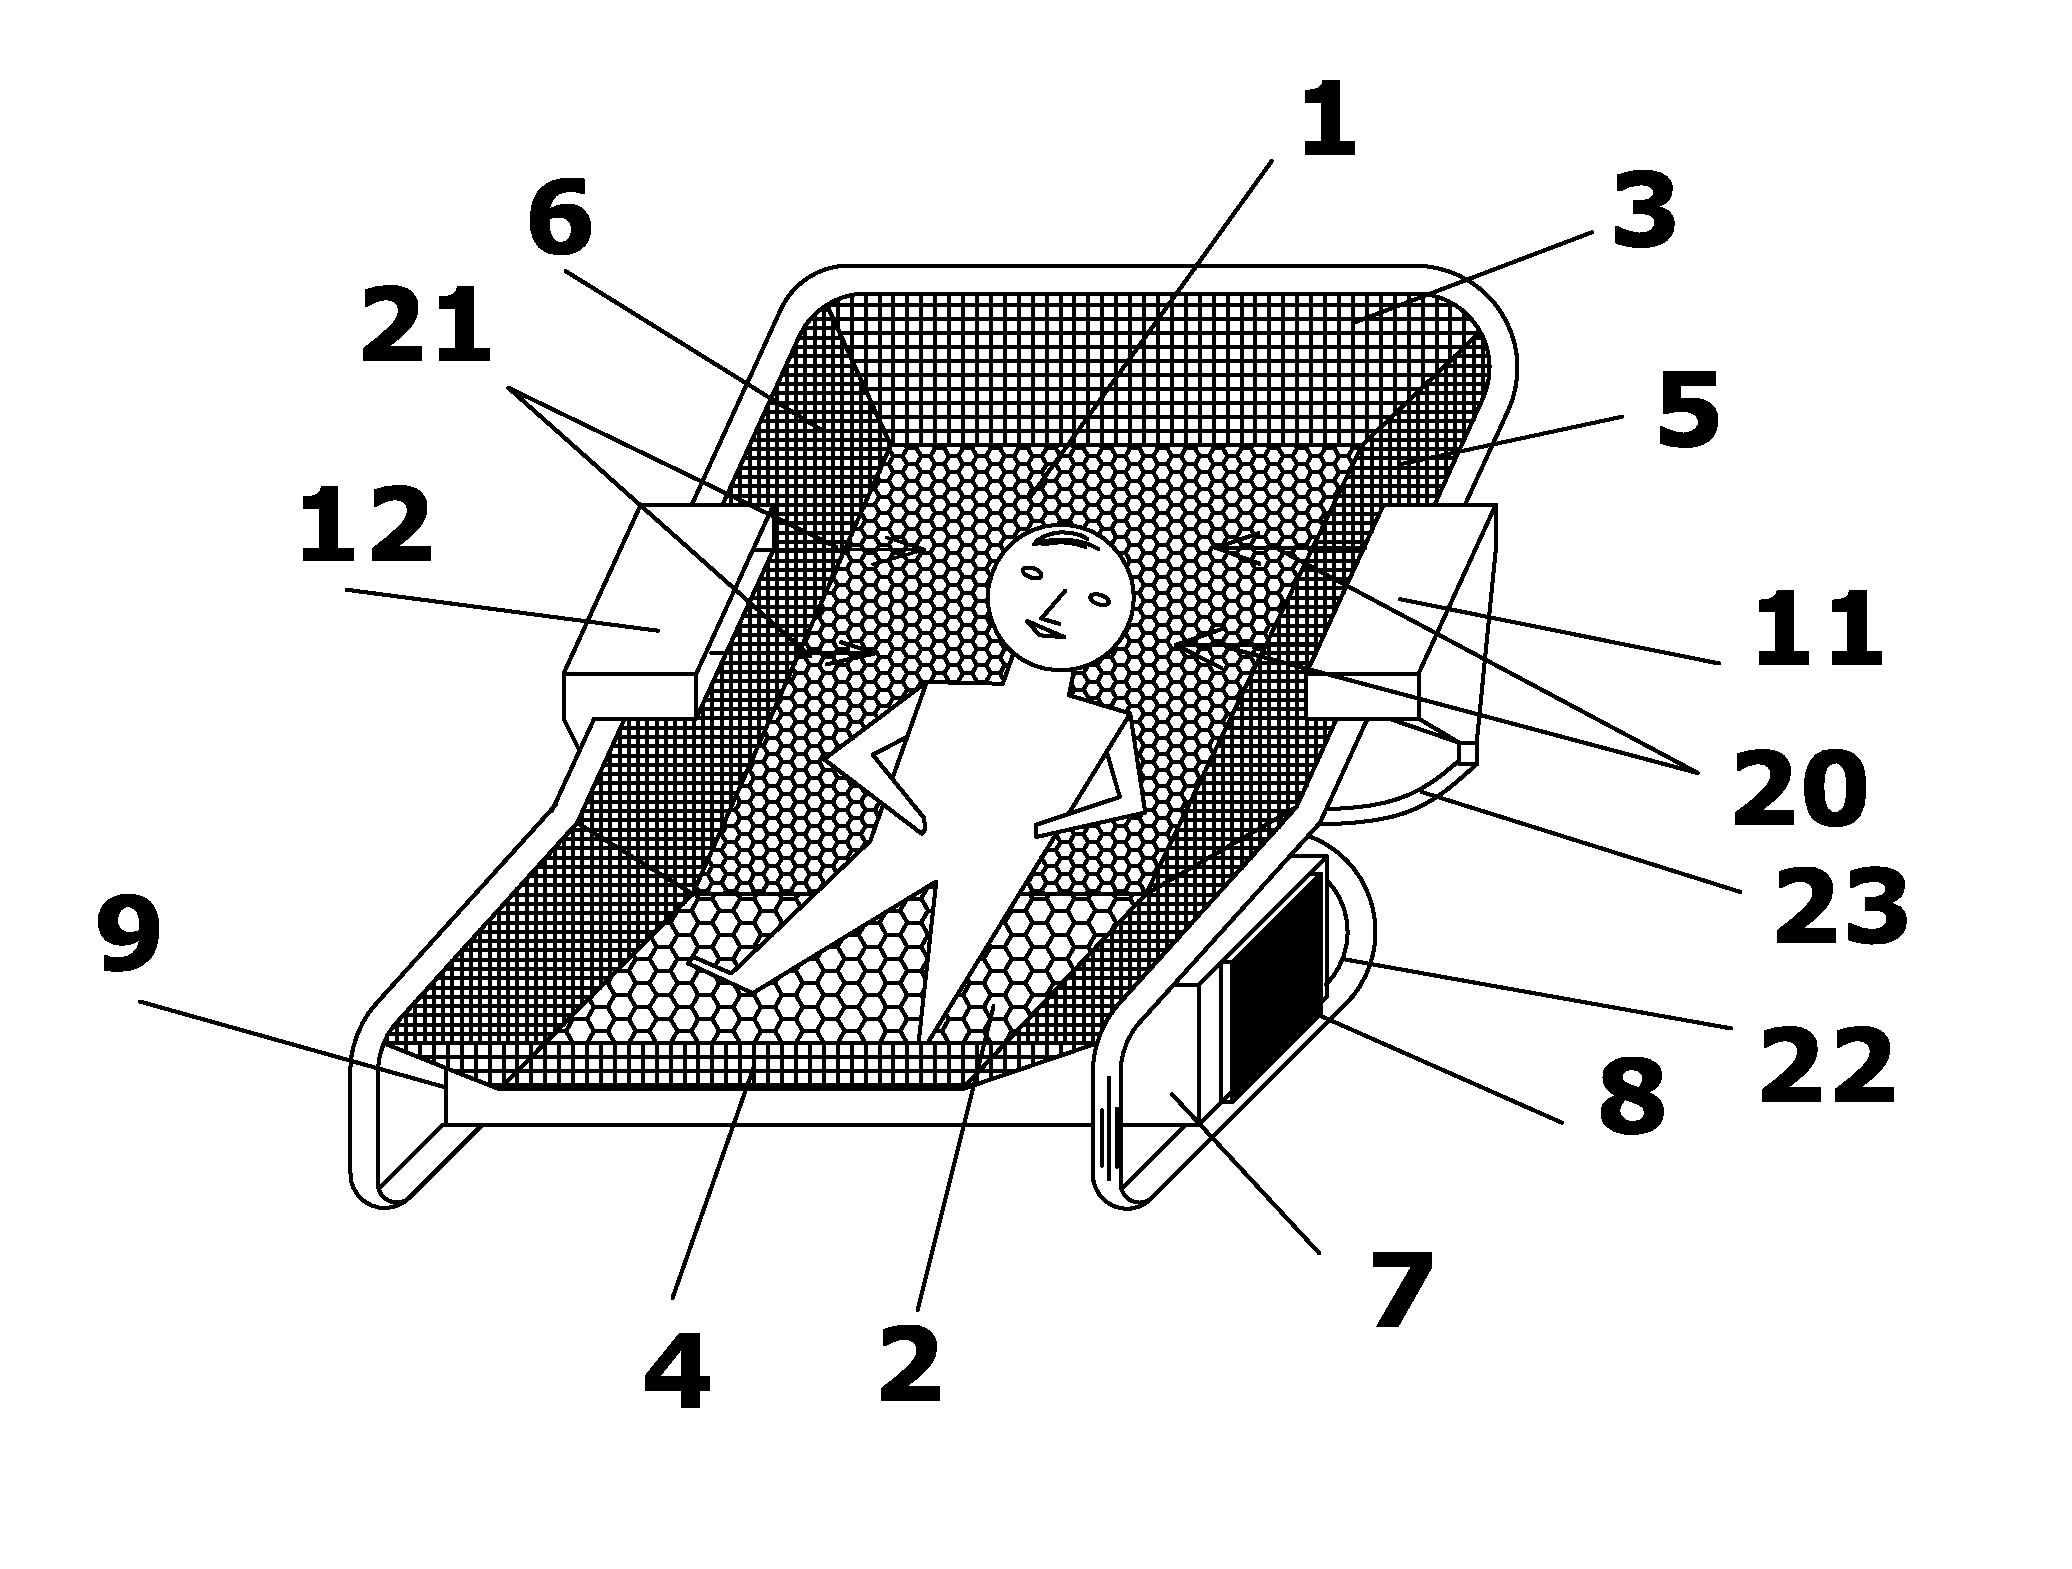 Apparatus for caring for infants